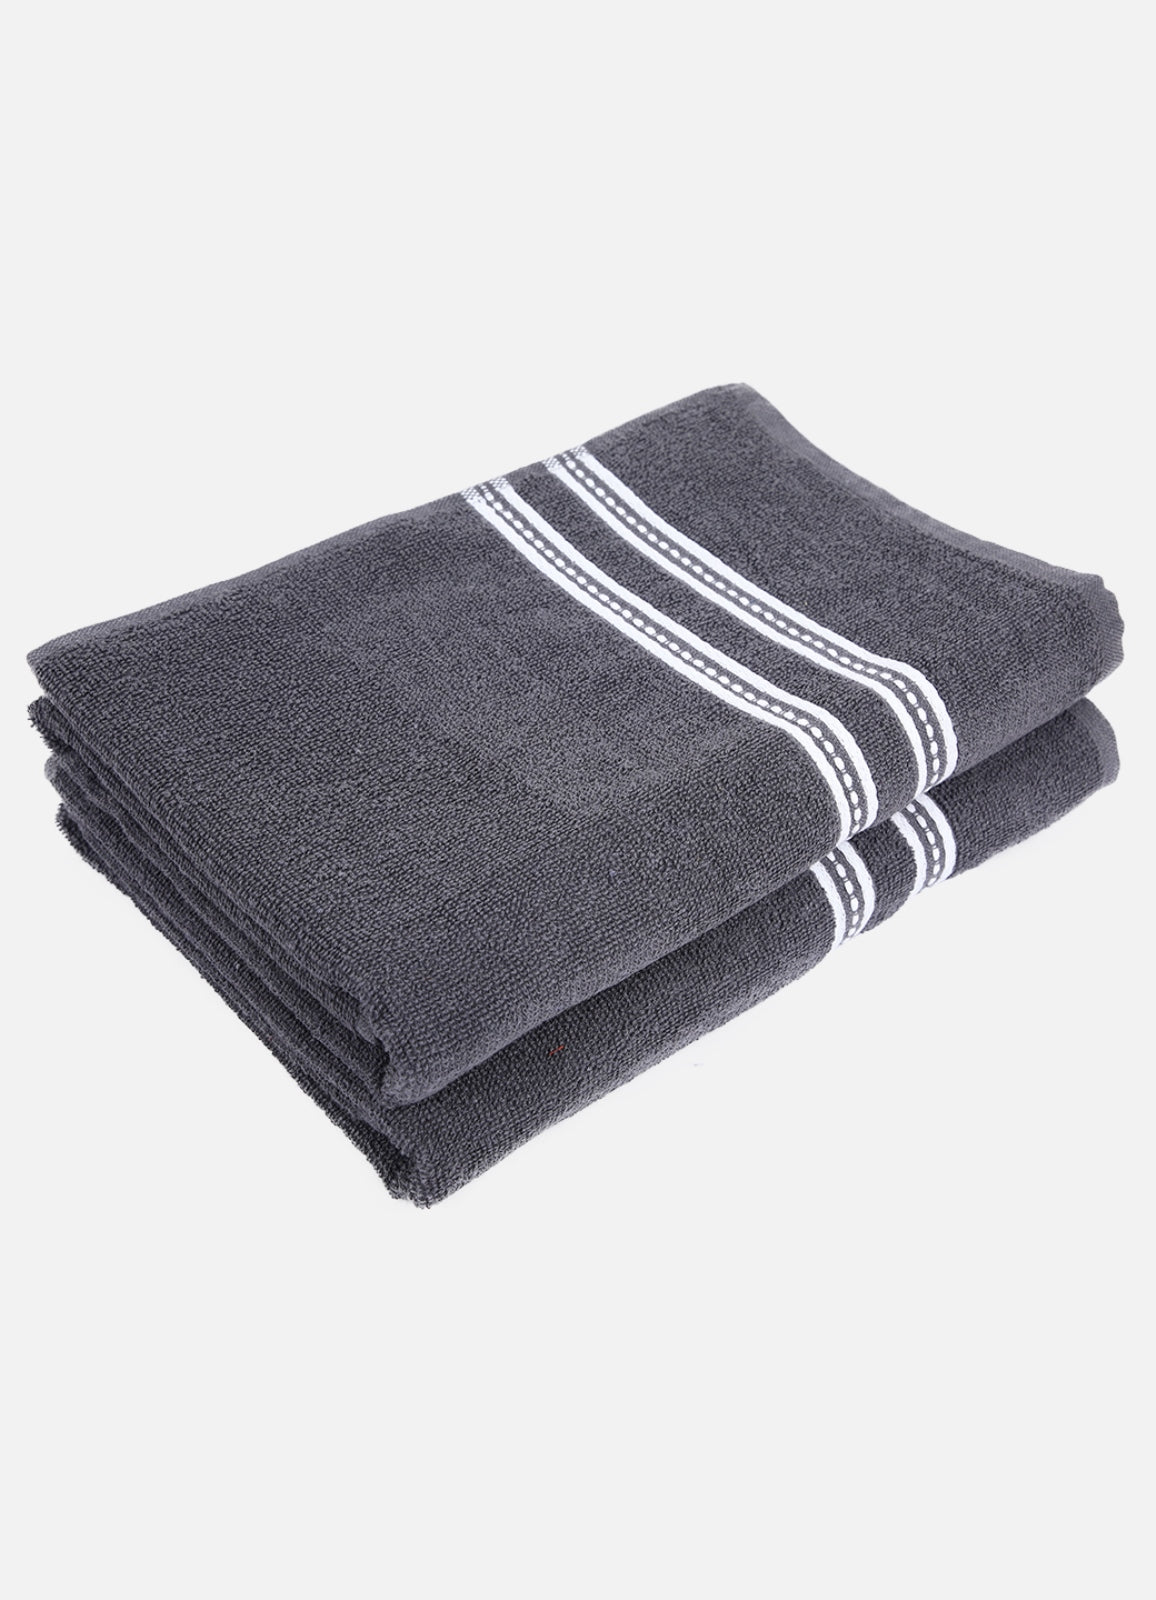 Set of 2 Grey Solid Cotton Towels